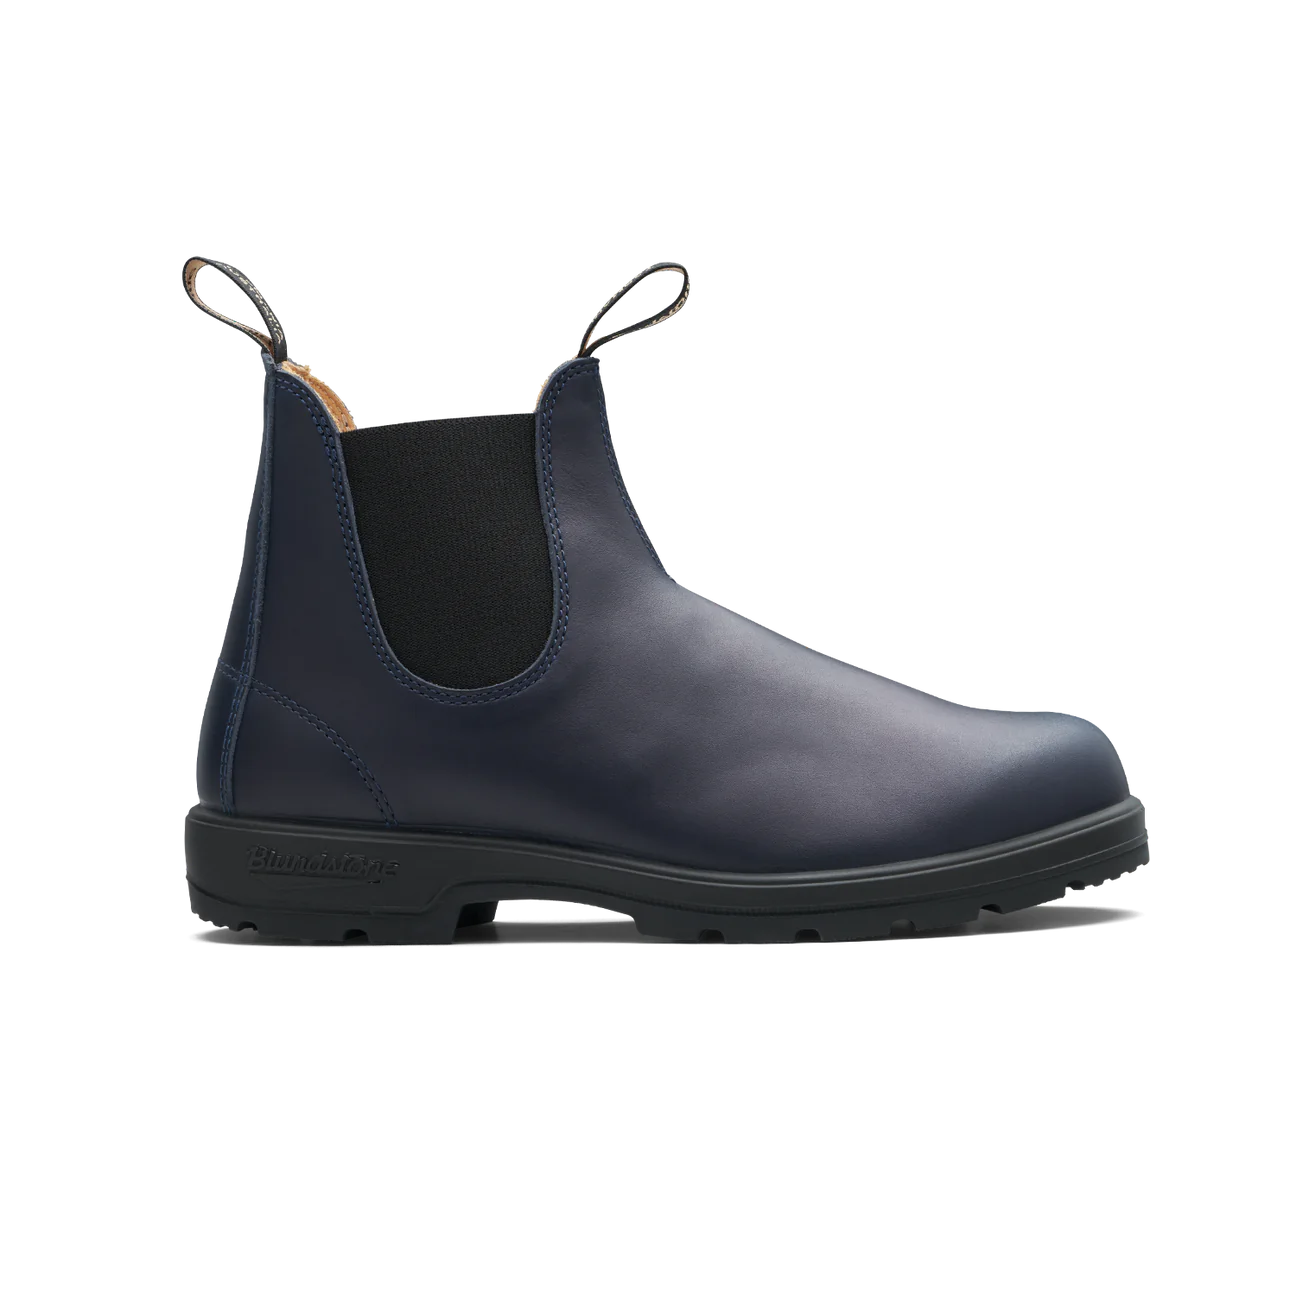 Blundstone Classic Navy Boot, 2246